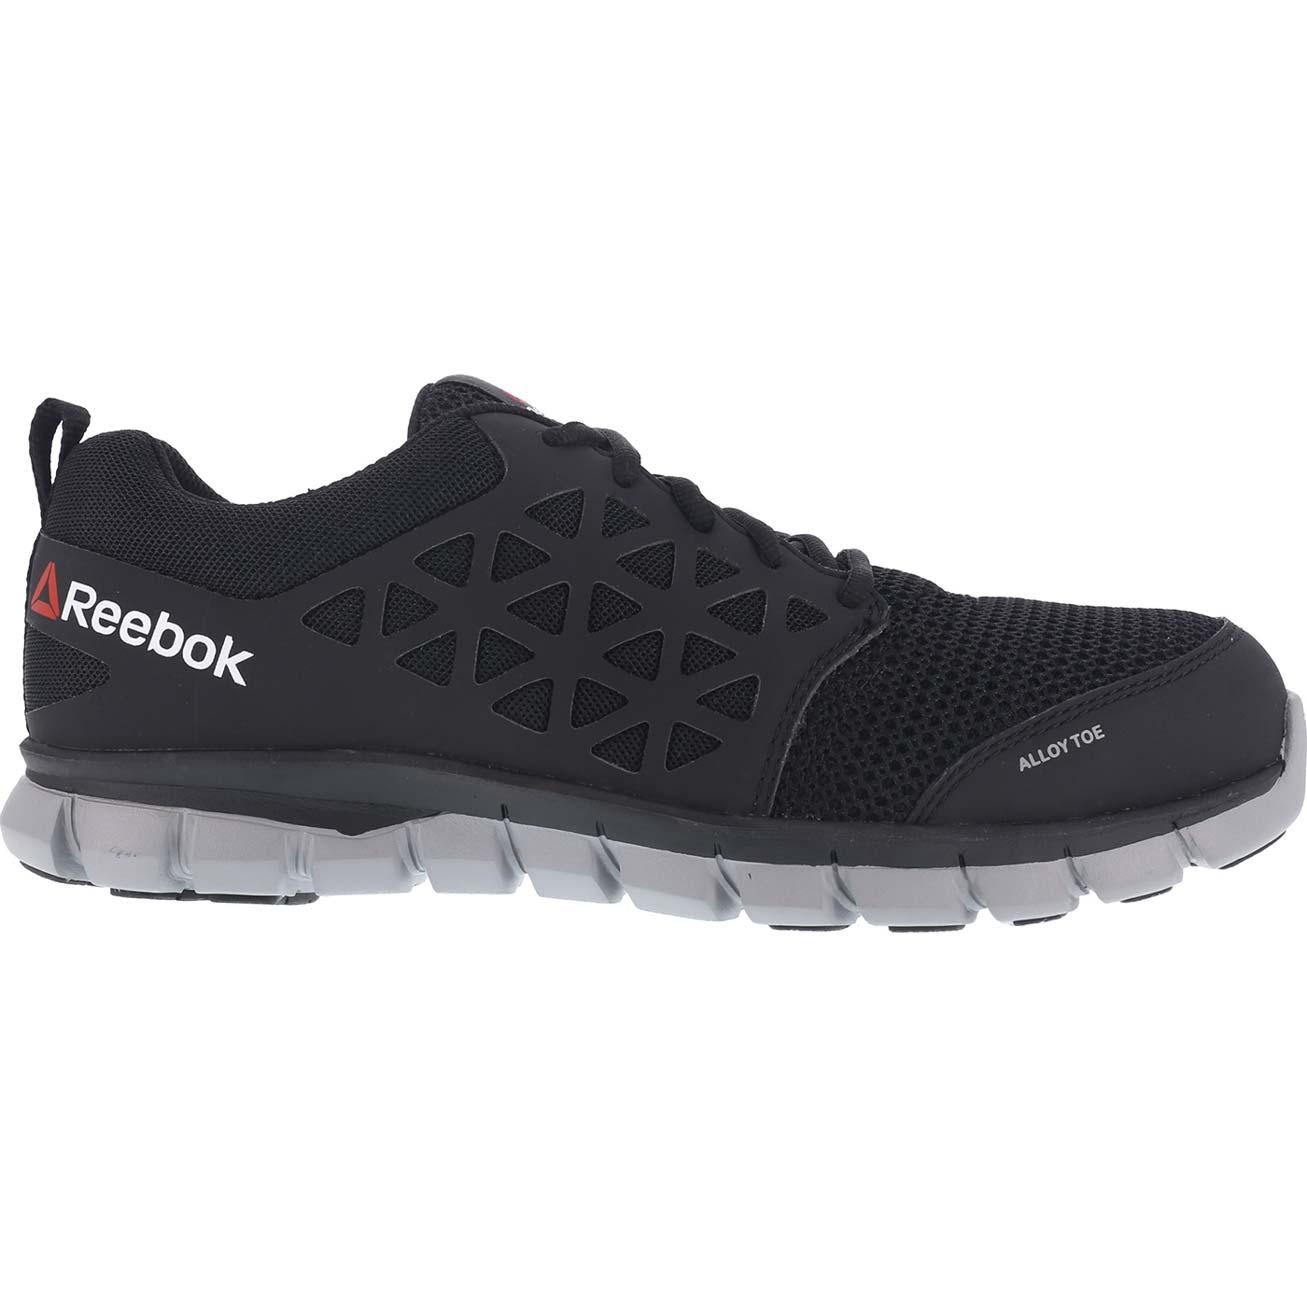 Reebok Work  Womens Sublite Cushion  Alloy Toe Eh  Work Safety Shoes Casual - image 4 of 4